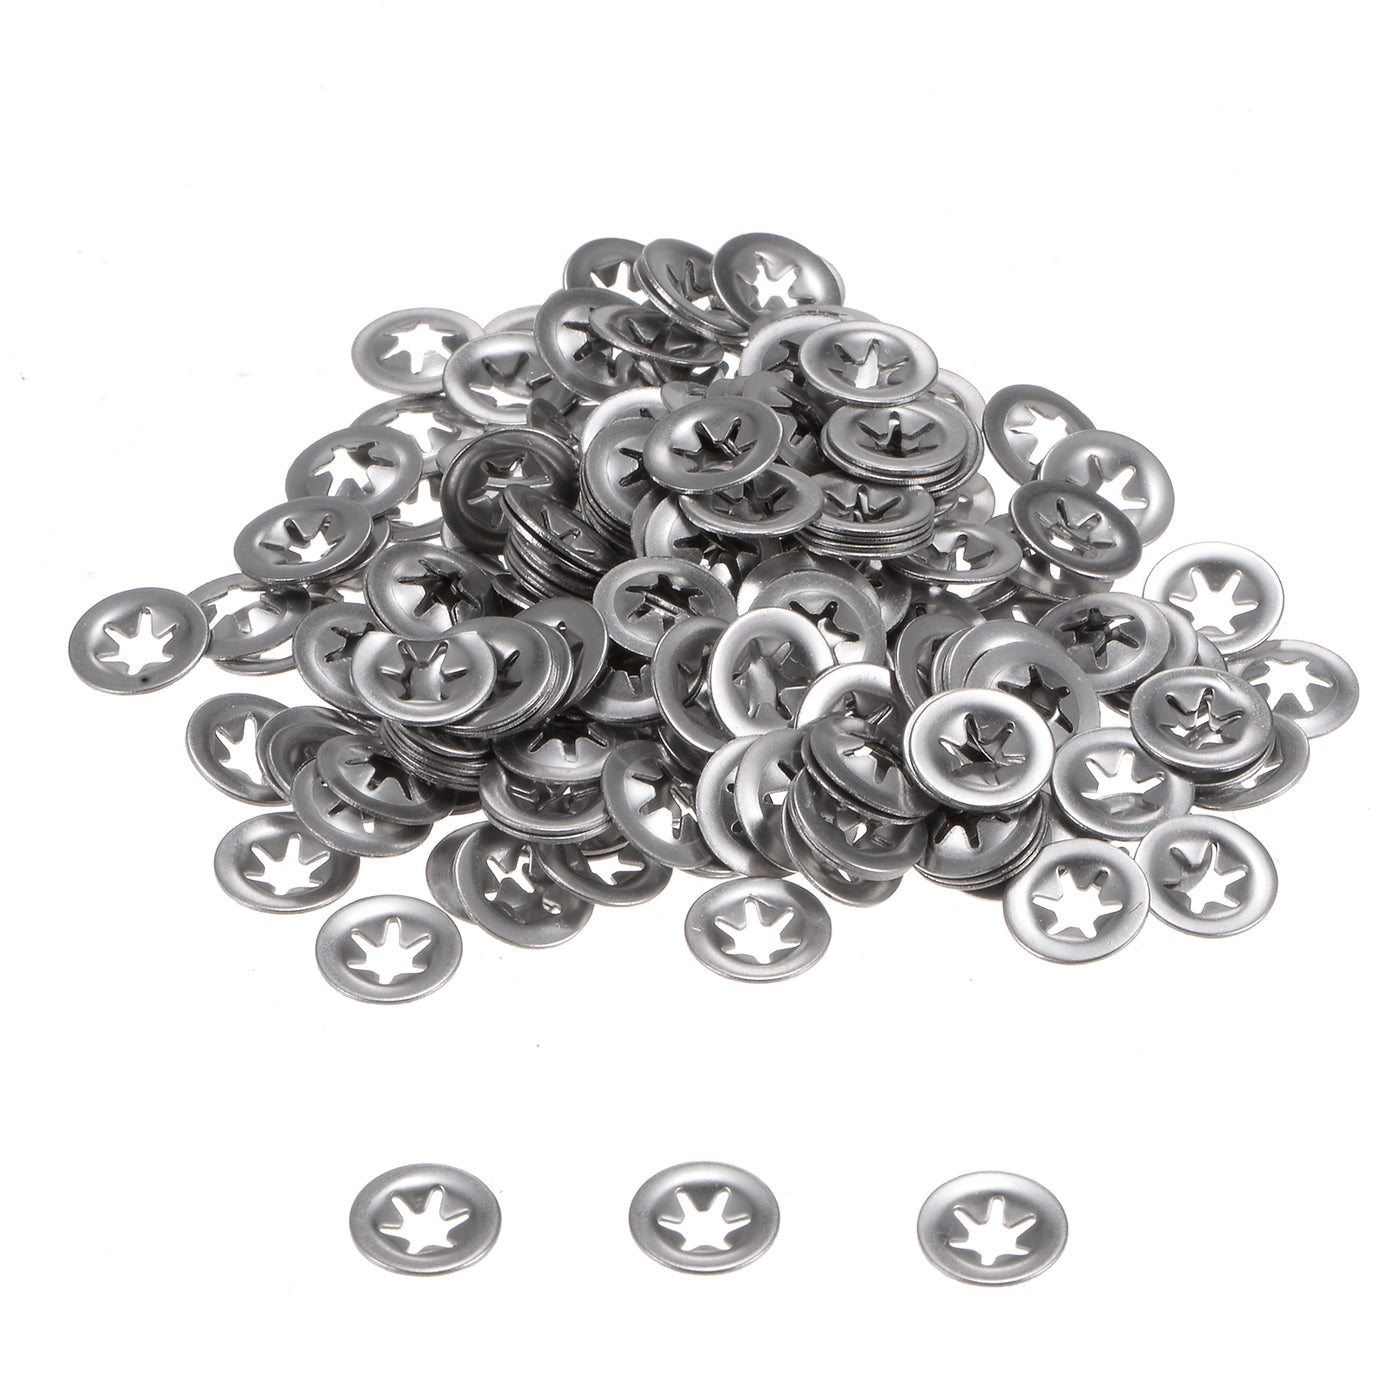 uxcell Uxcell 200pcs Internal Tooth Star Lock Washers M3 Stainless Steel Starlock Push Nuts